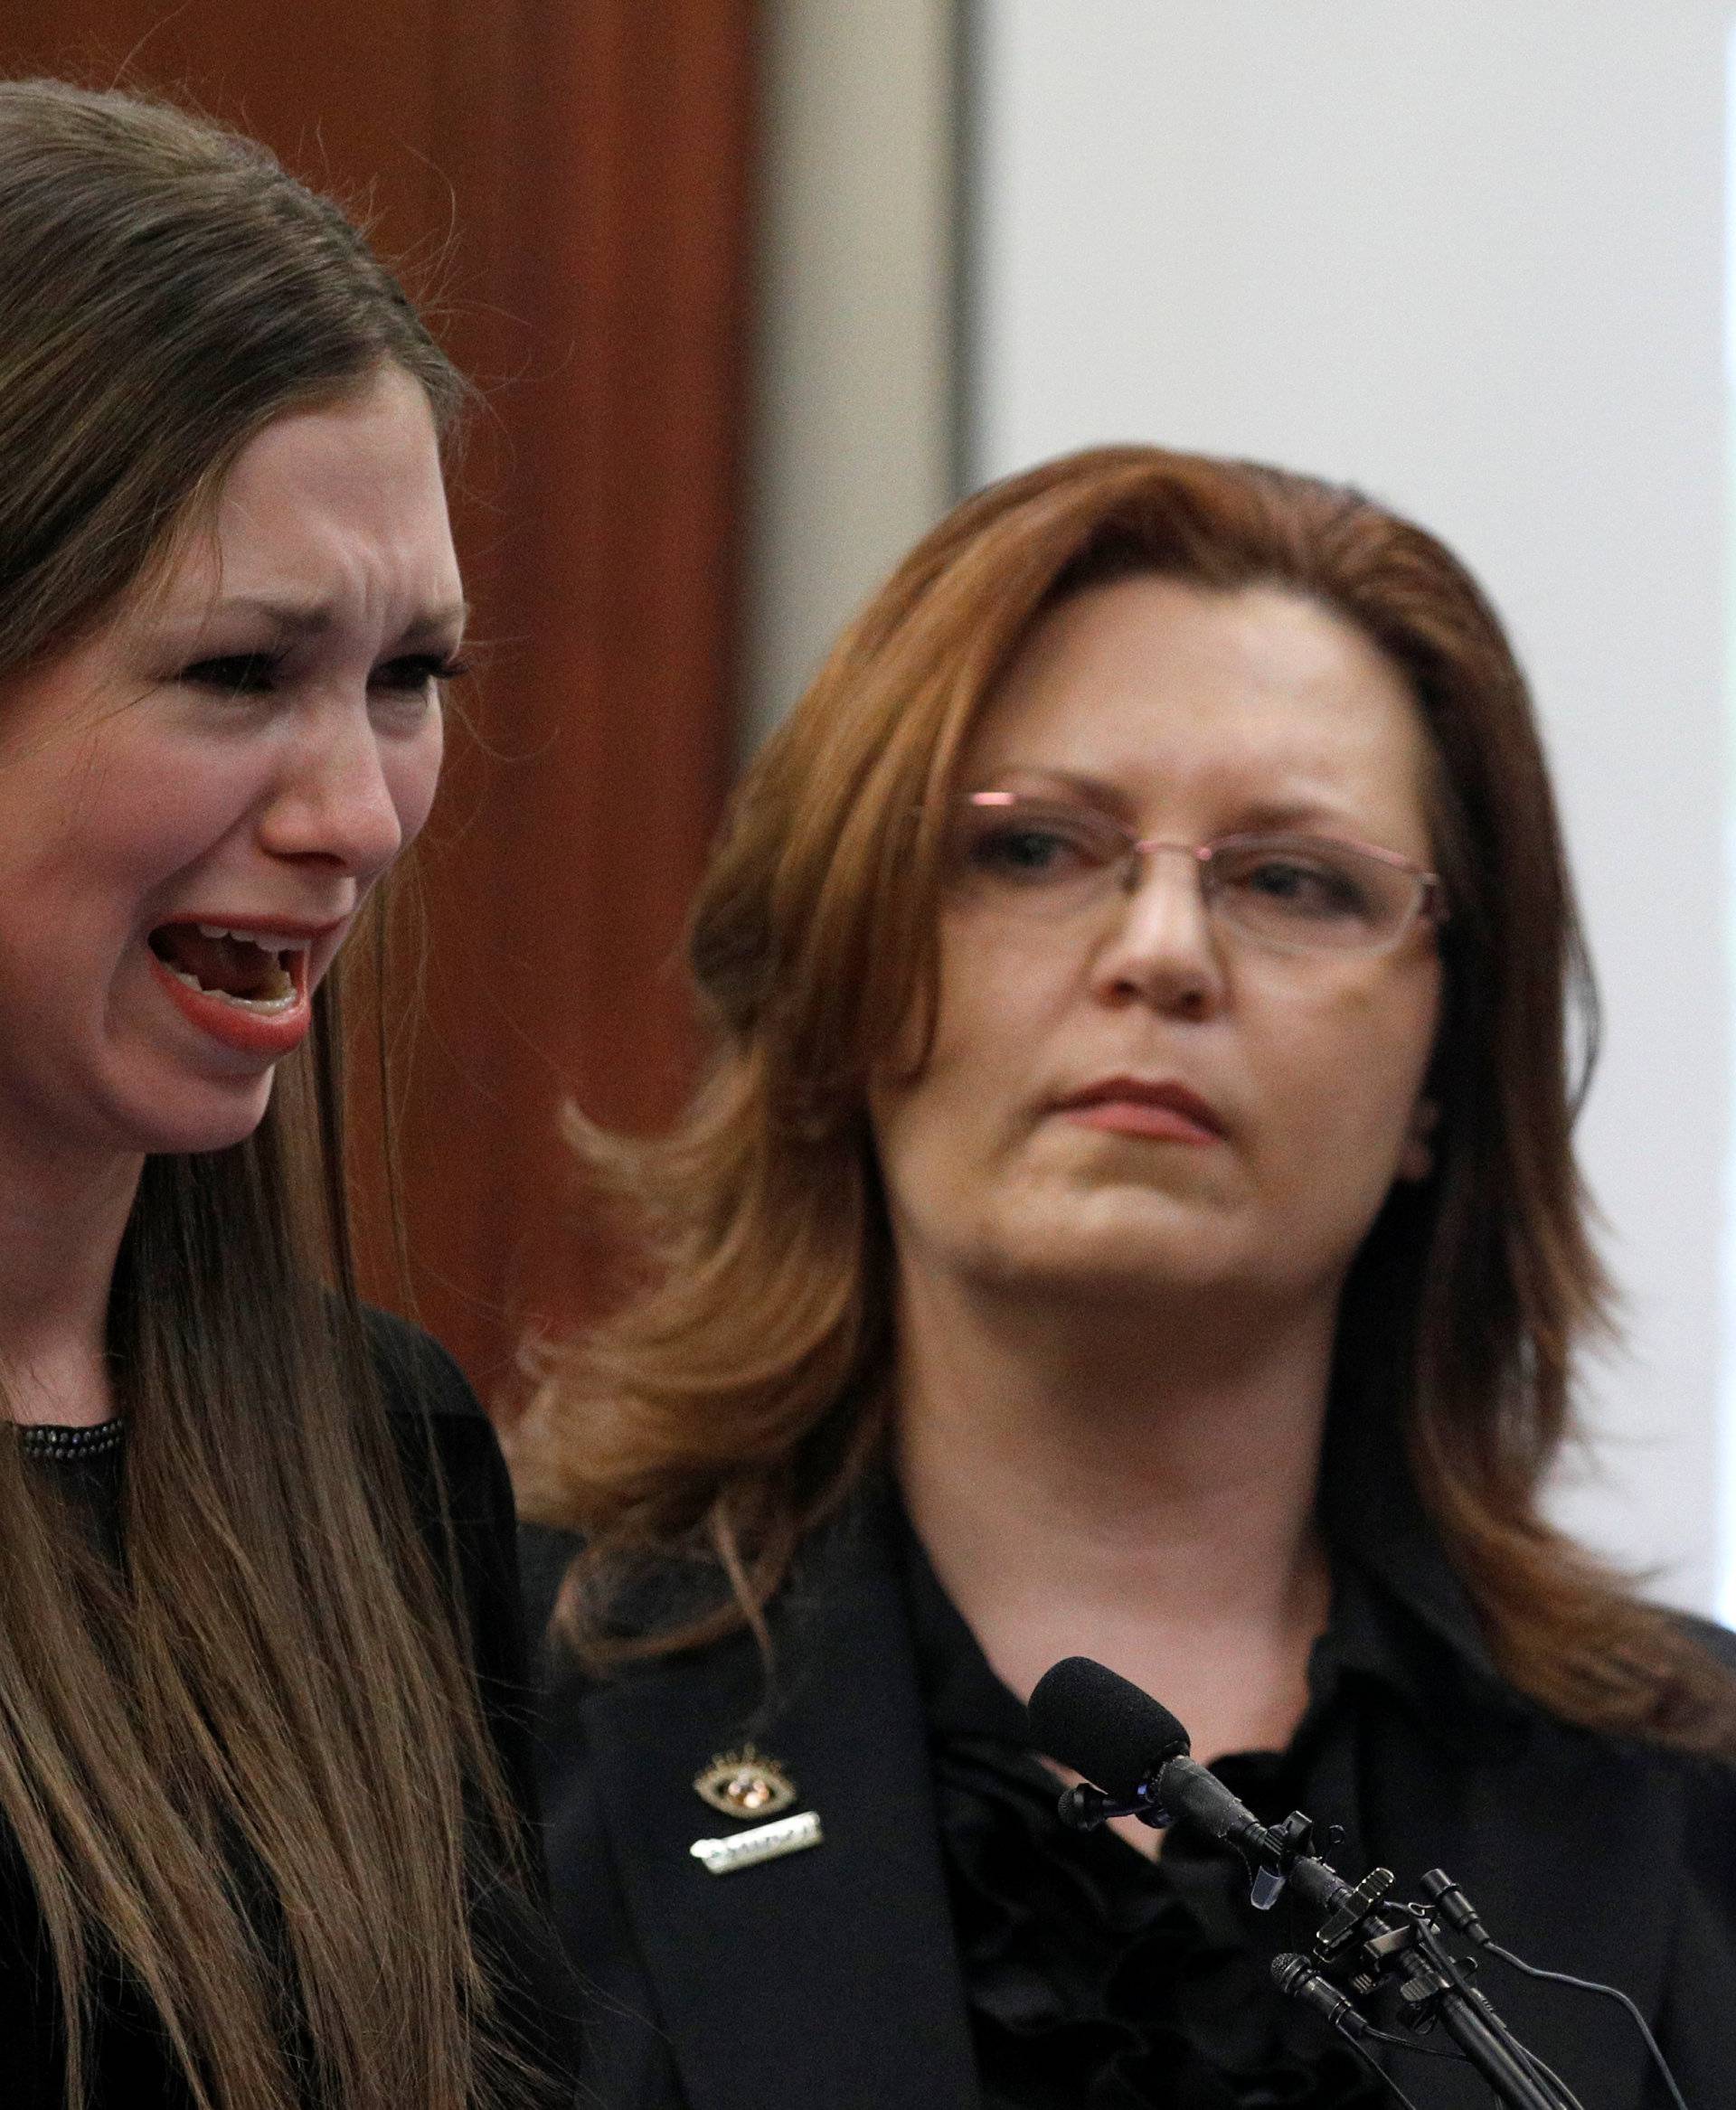 Victim Jessica Smith speaks at the sentencing hearing for Larry Nassar, a former team USA Gymnastics doctor who pleaded guilty in November 2017 to sexual assault charges, in Lansing